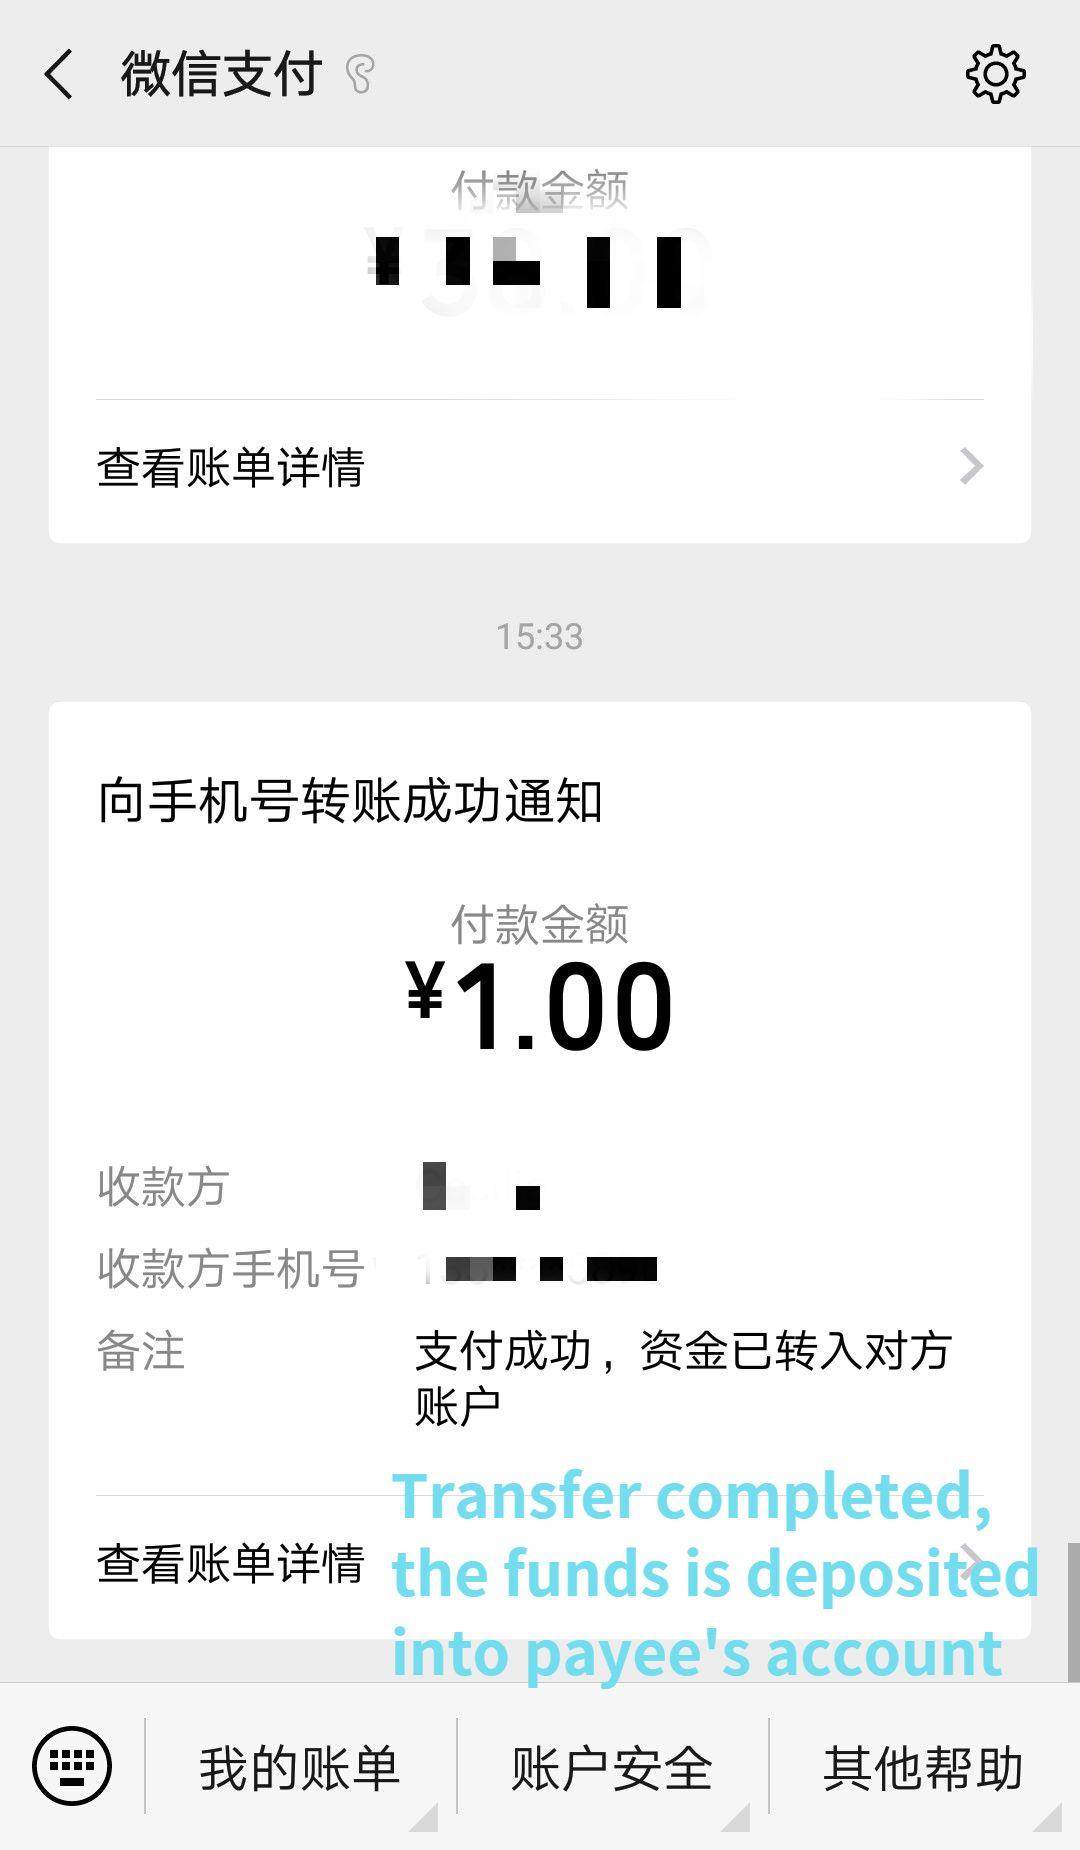 WeChat Allows Tranfers via Phone Number! New Feature!